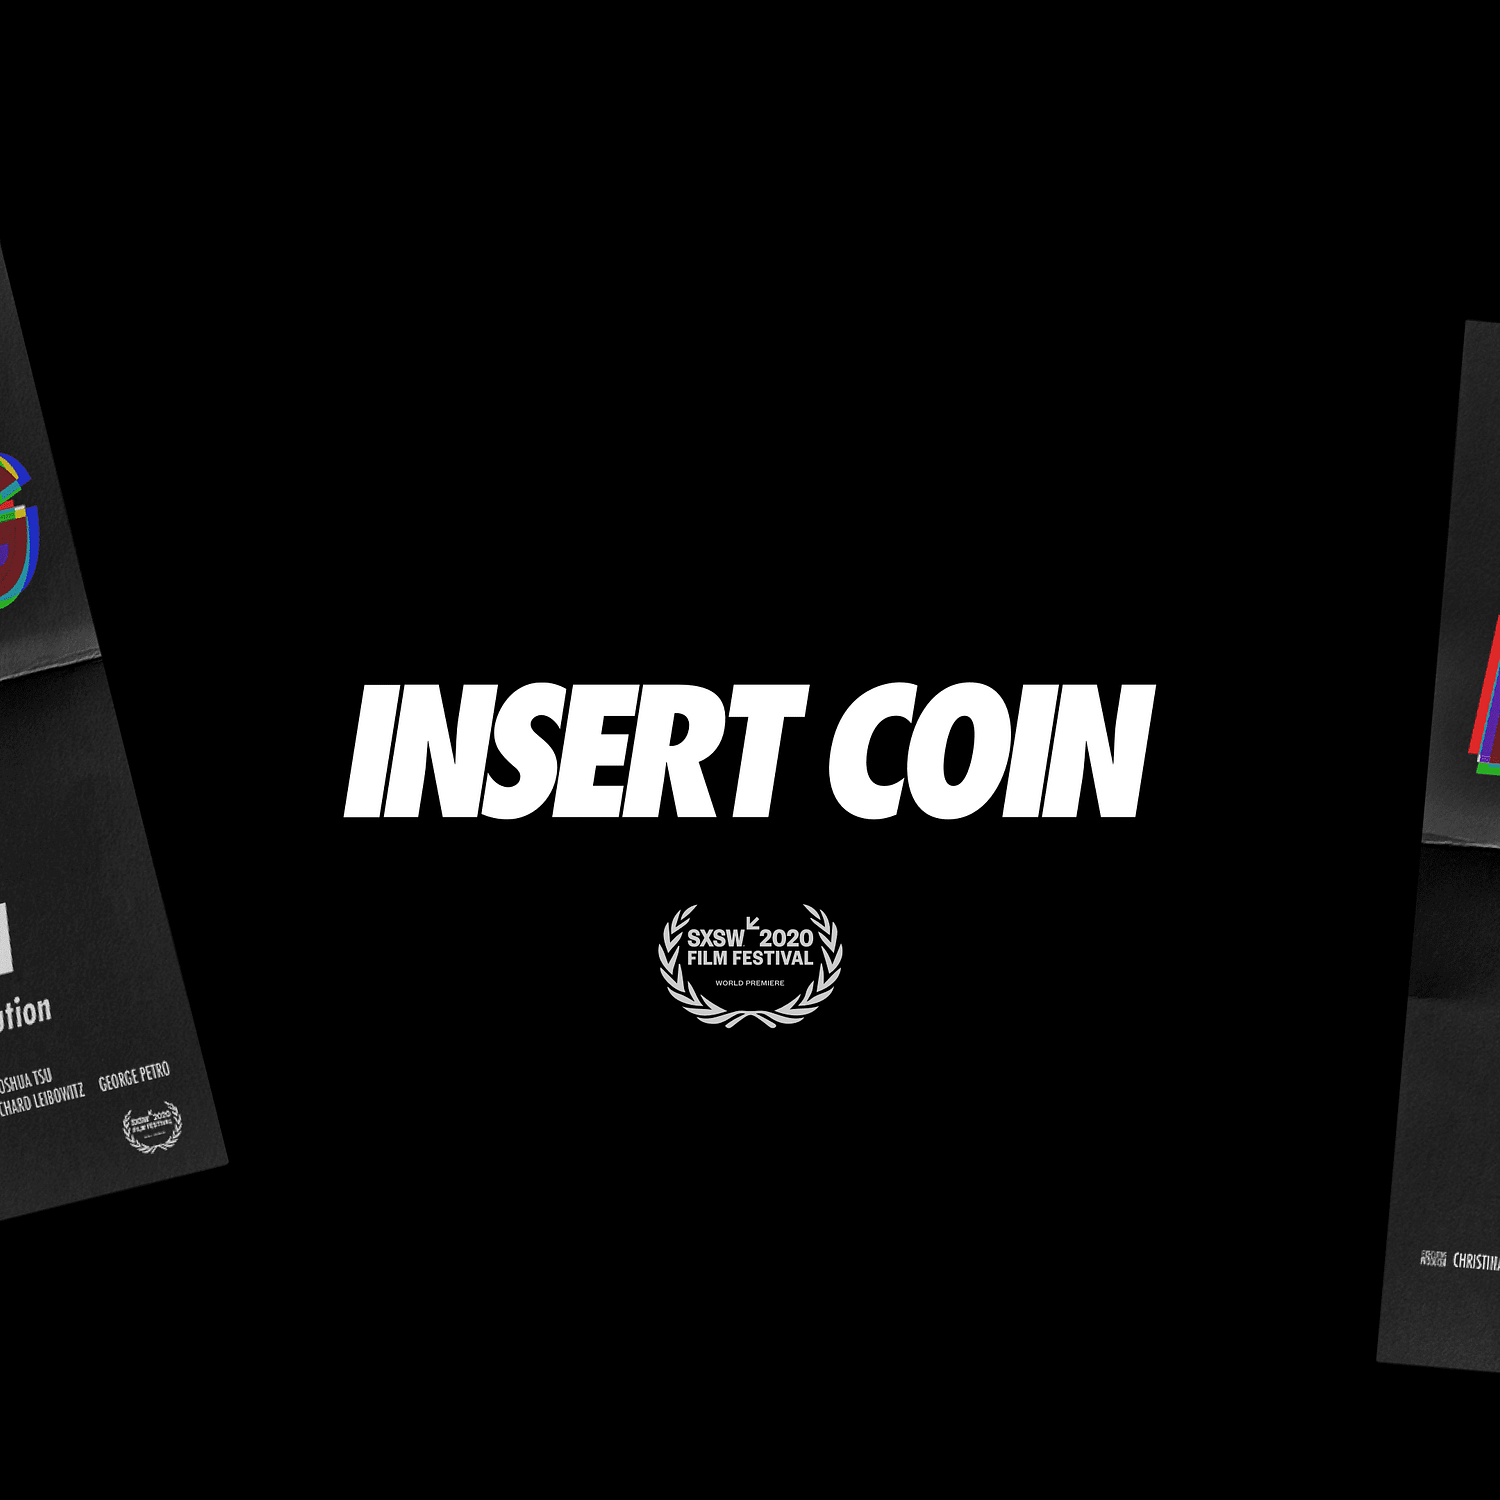 Insert Coin SXSW 2020 Documentary Debut Poster 2